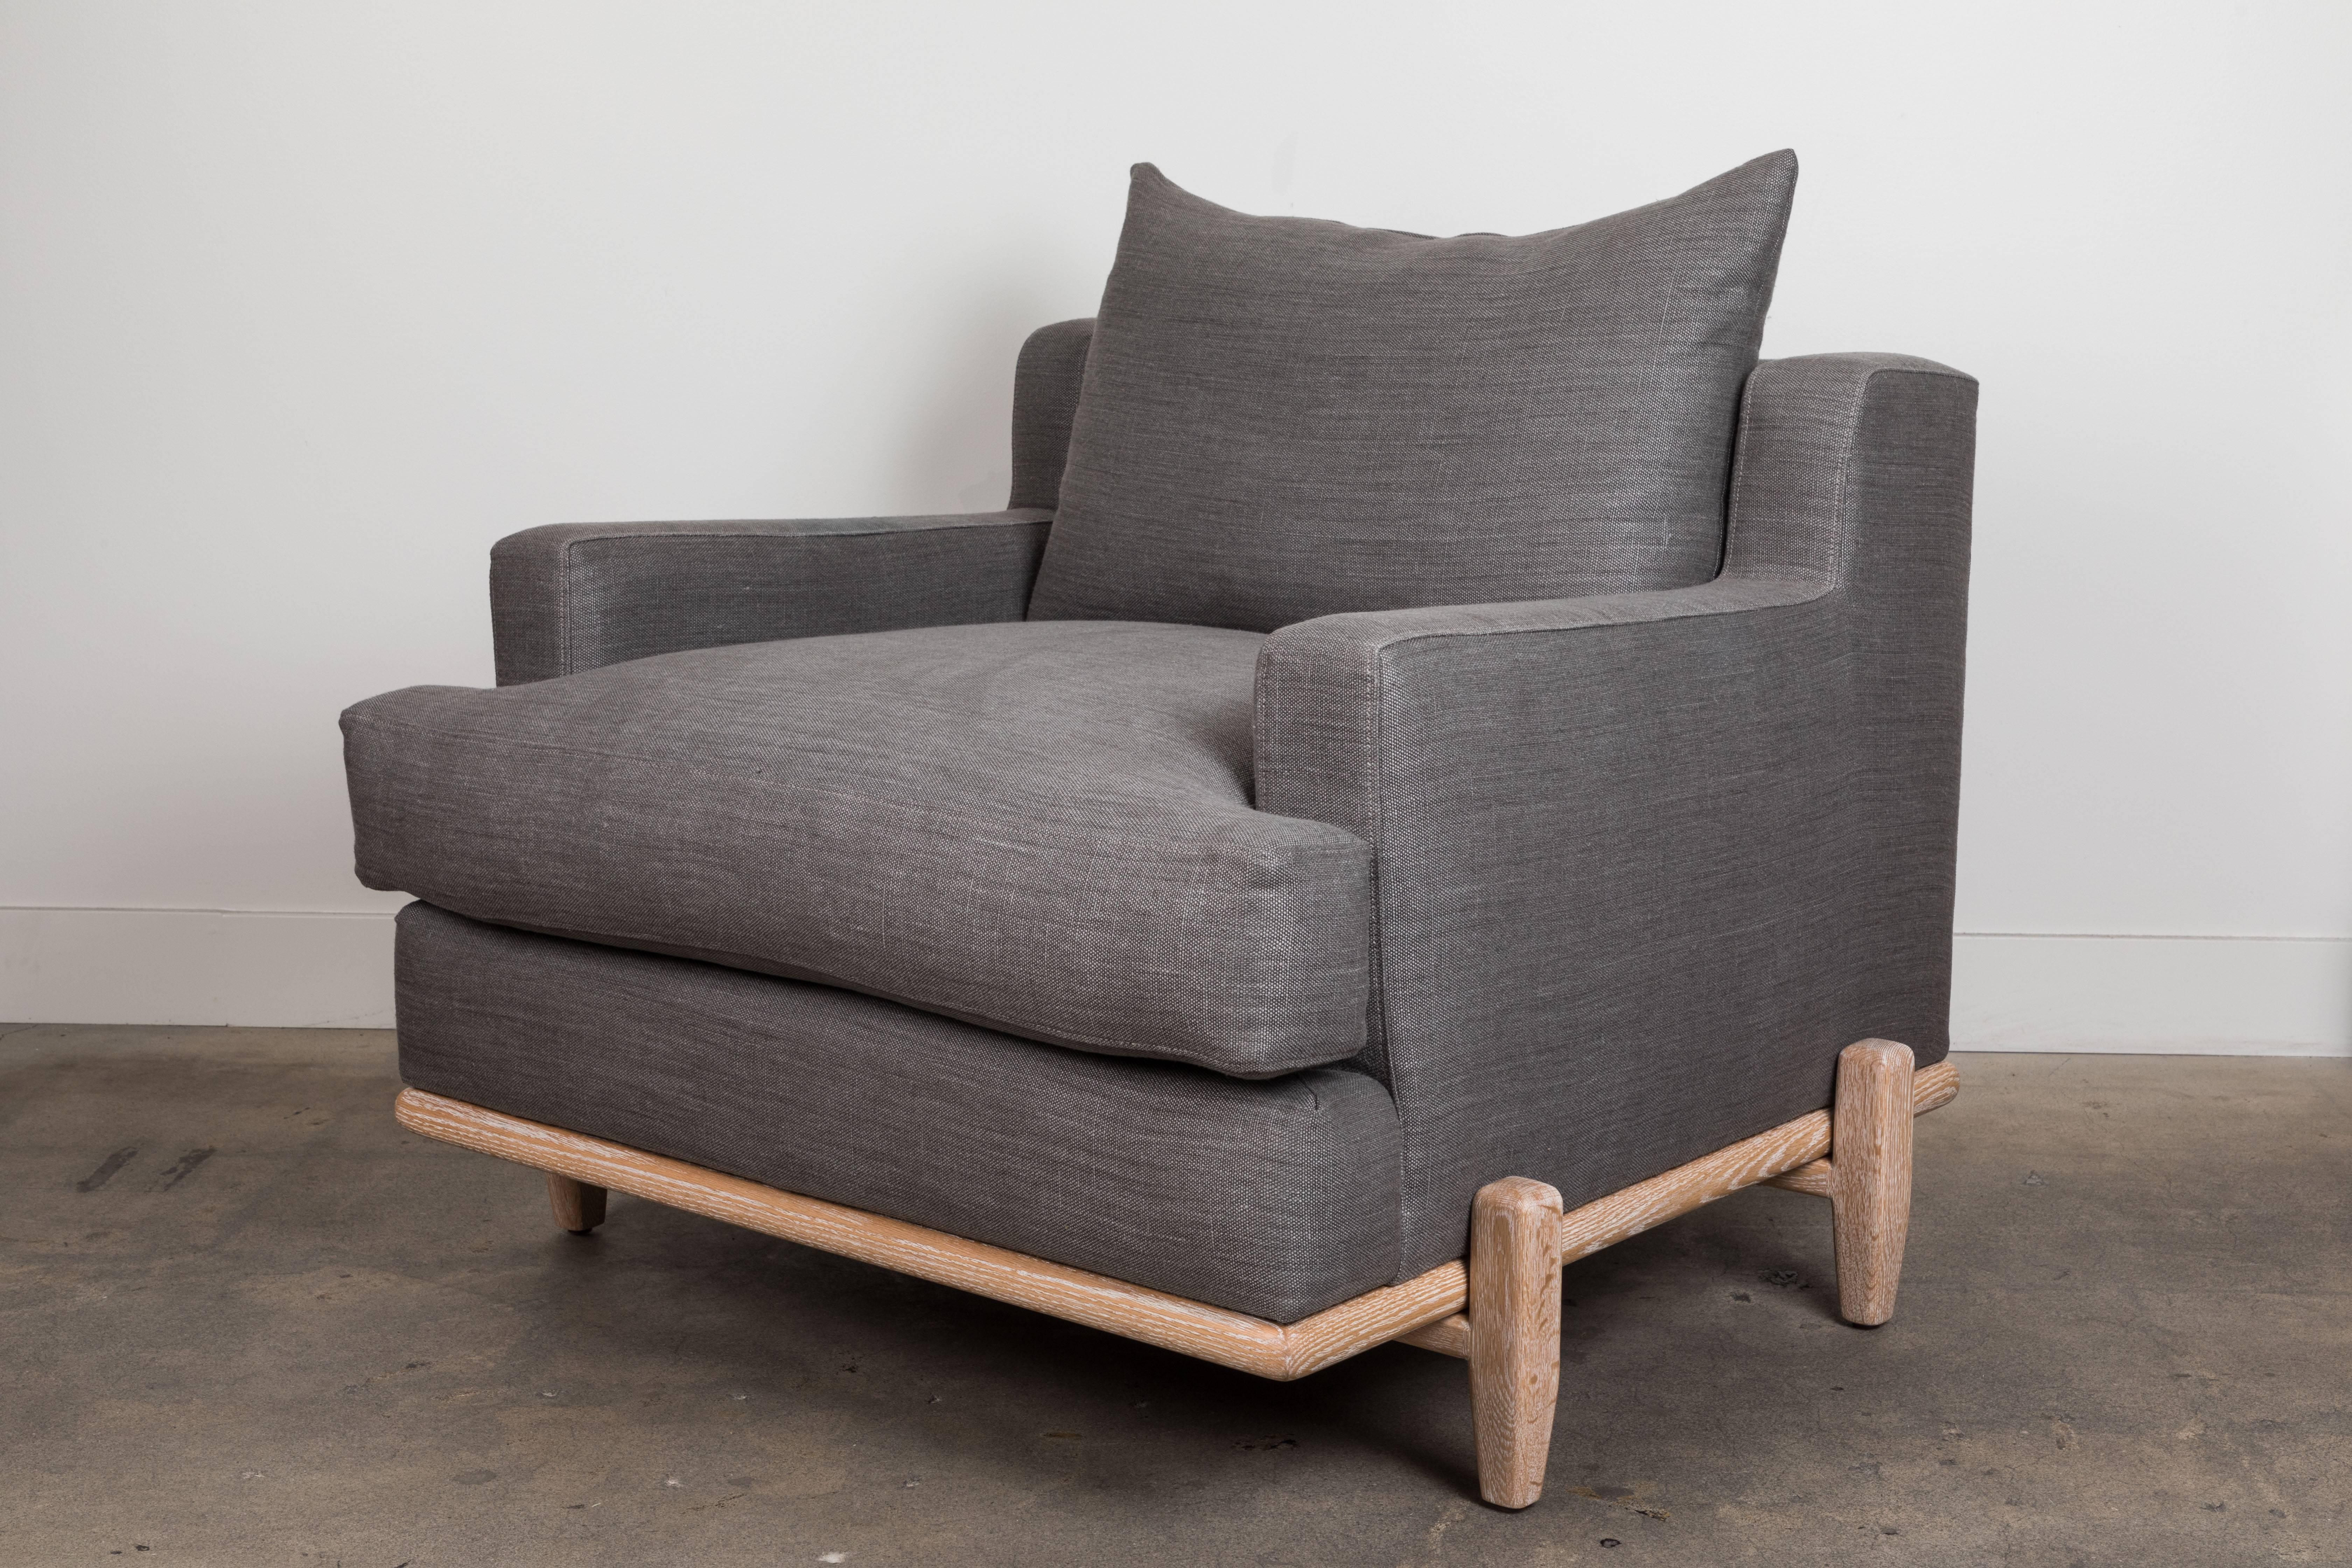 The George Chair is part of the collaborative collection with interior designer Brian Paquette. The George Chair is a low profile, but wide-scale lounge chair that rests on top of a solid wood base. This piece is available in exclusive BP for LF